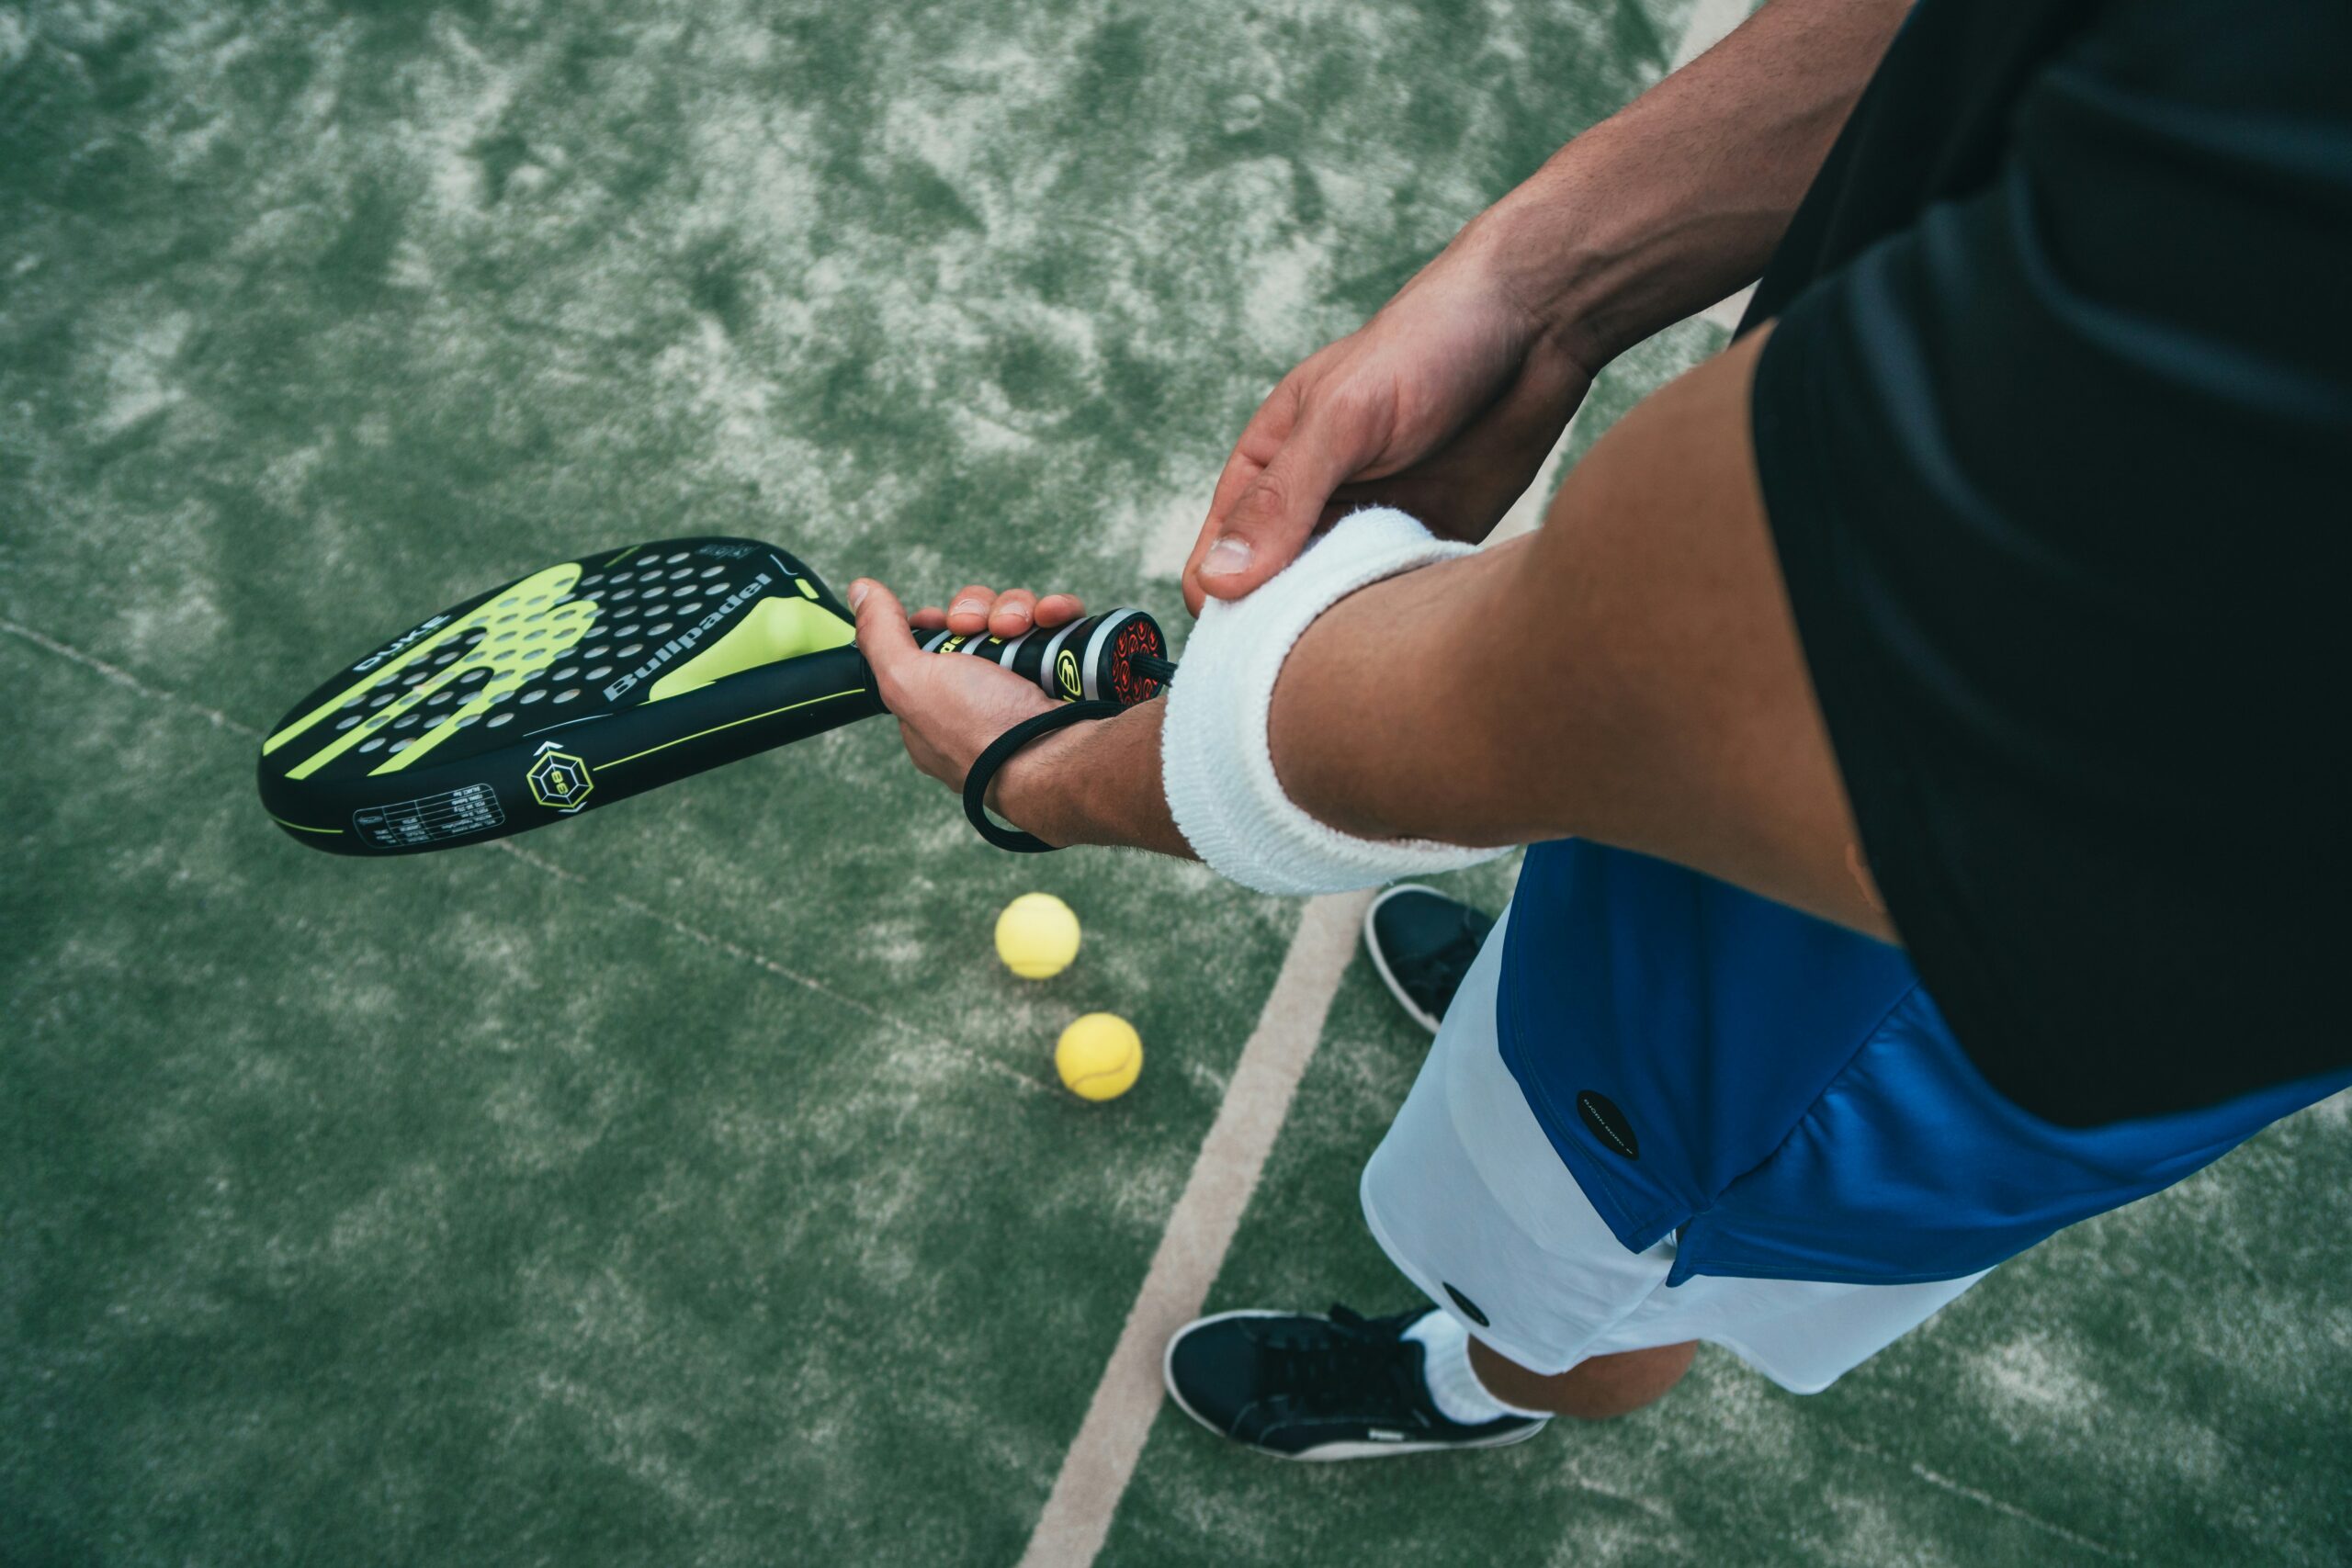 explore the best odds and latest tennis betting markets at your fingertips. place your bets and follow every match with our top-notch tennis betting platform.